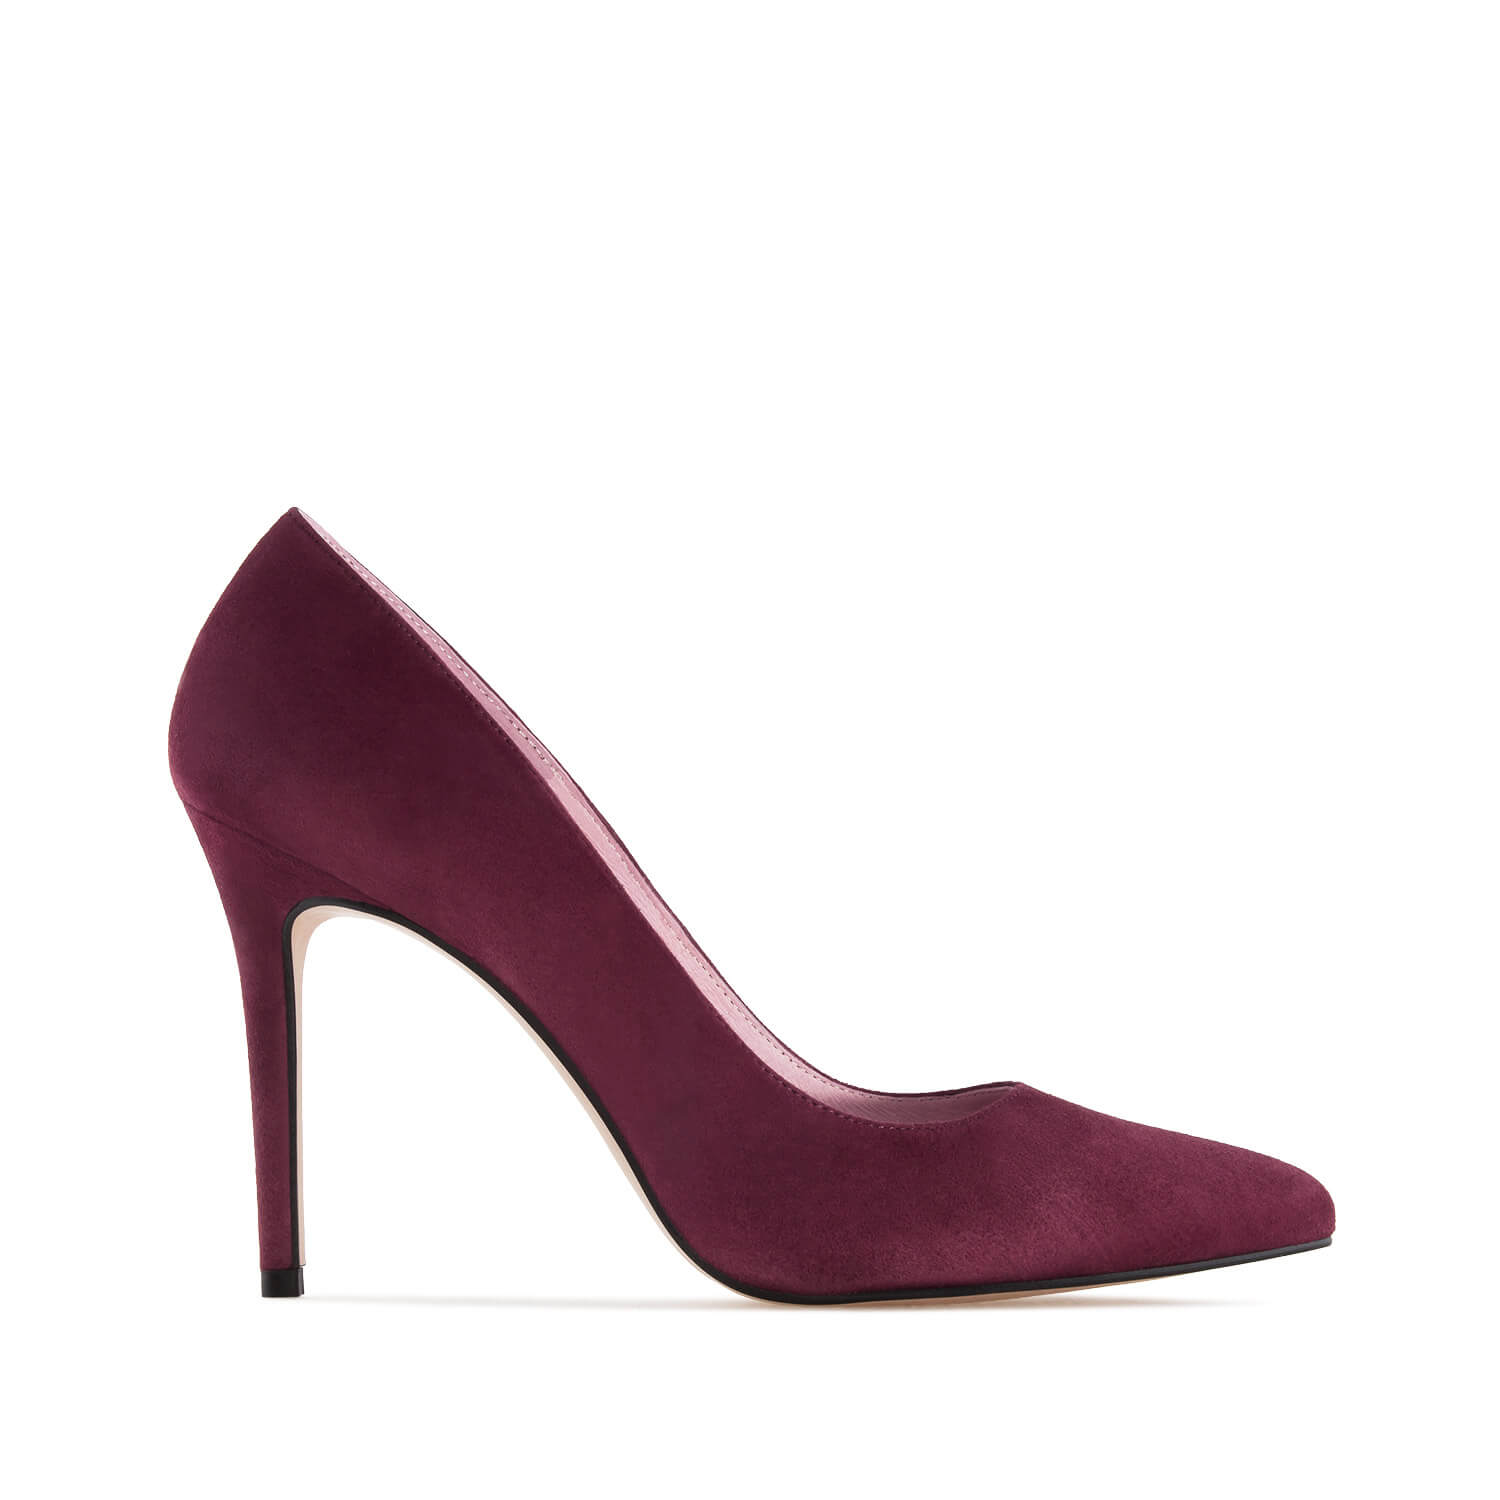 Heeled Shoes in Burgundy Suede 